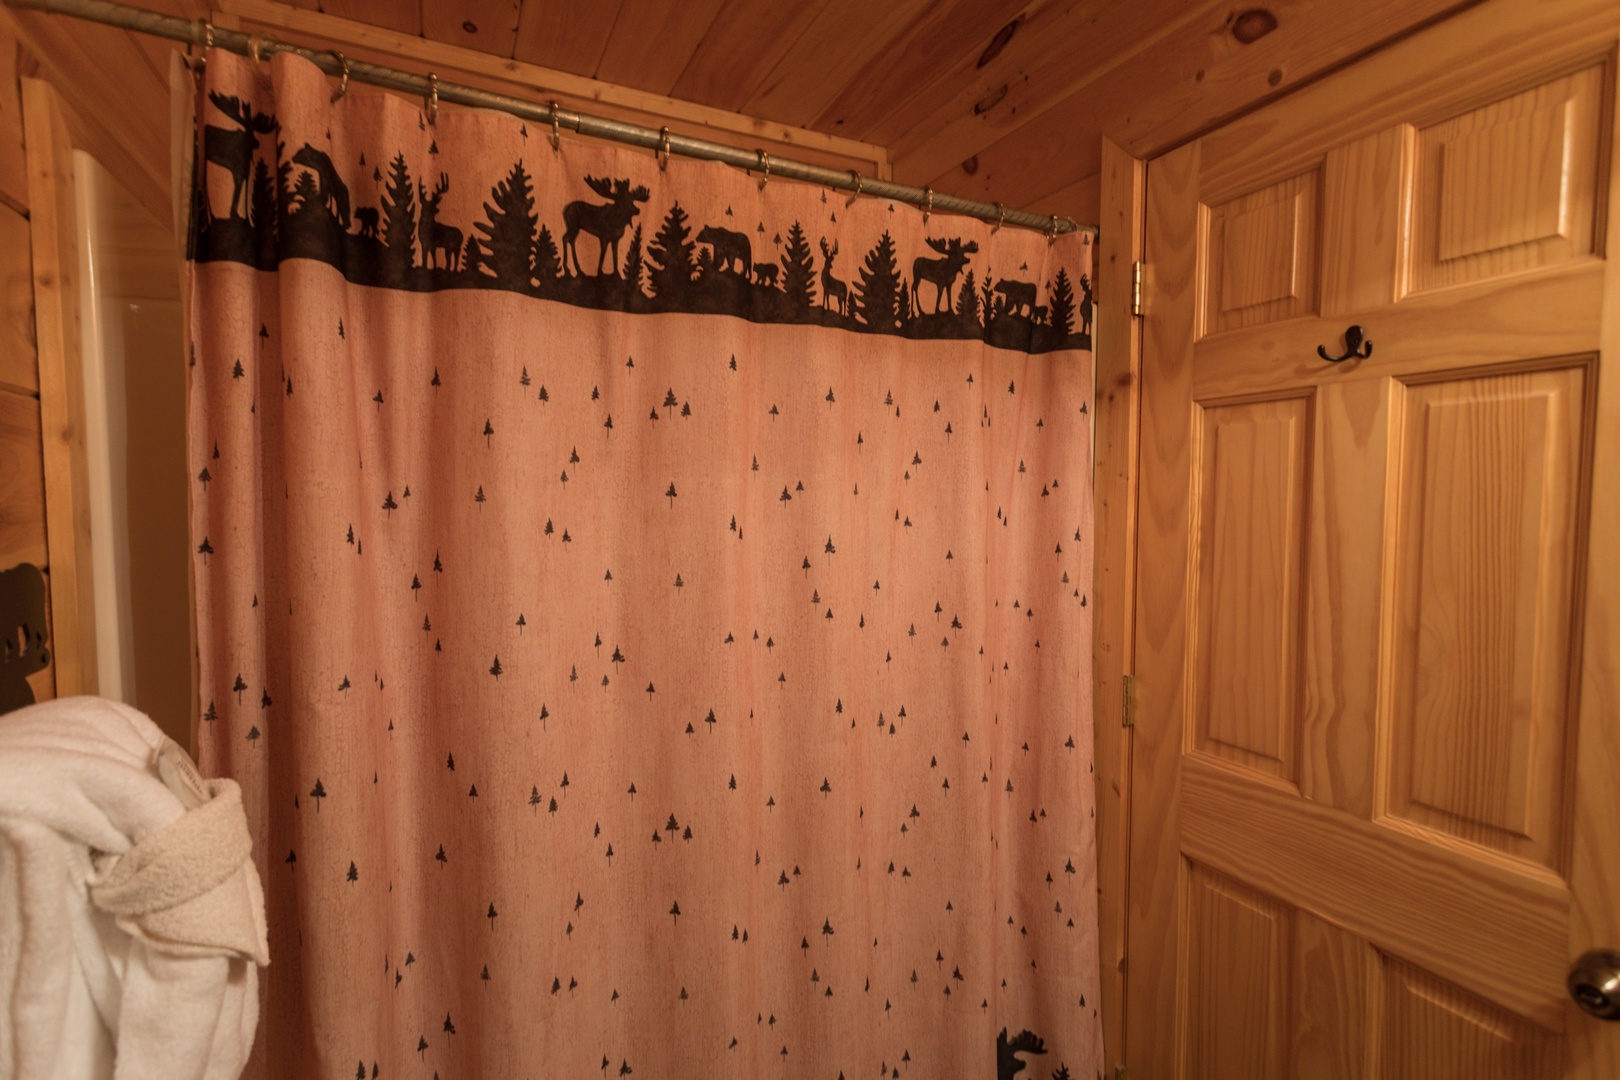 Shower in a bathroom at Better View, a 4 bedroom cabin rental located in Pigeon Forge